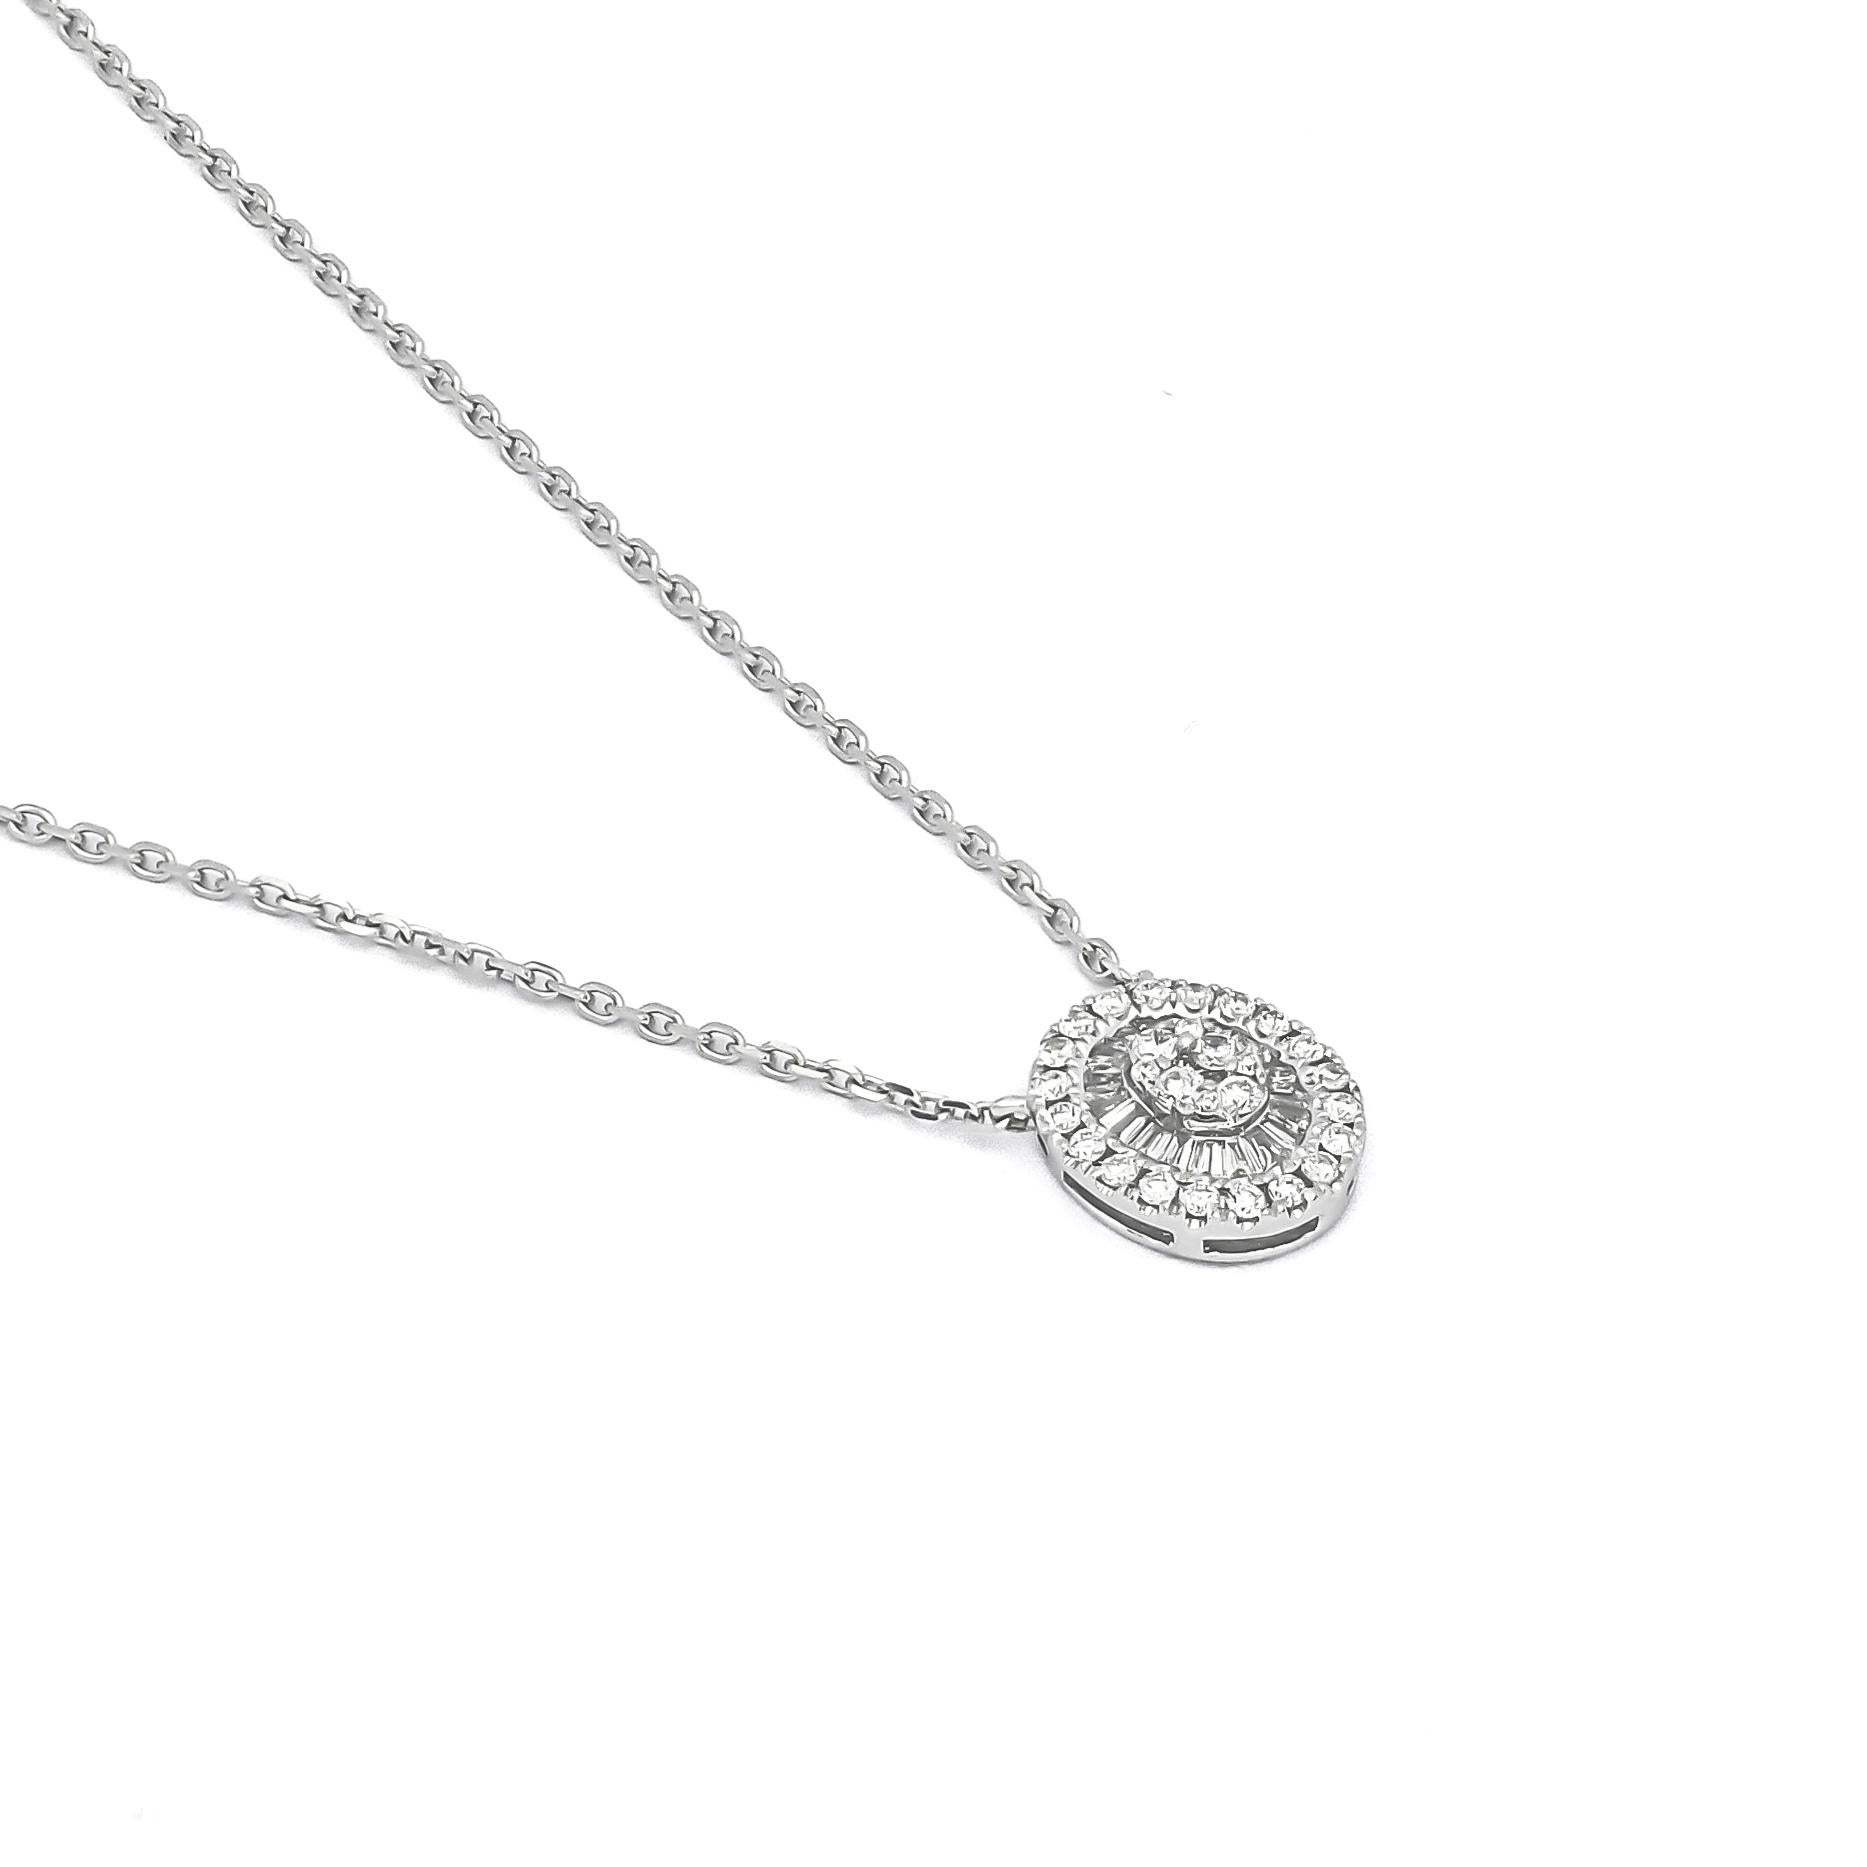 Natural Diamond Pendant 0.28 cts 18KT White Gold chain Pendant Necklace N10912 For Sale 1